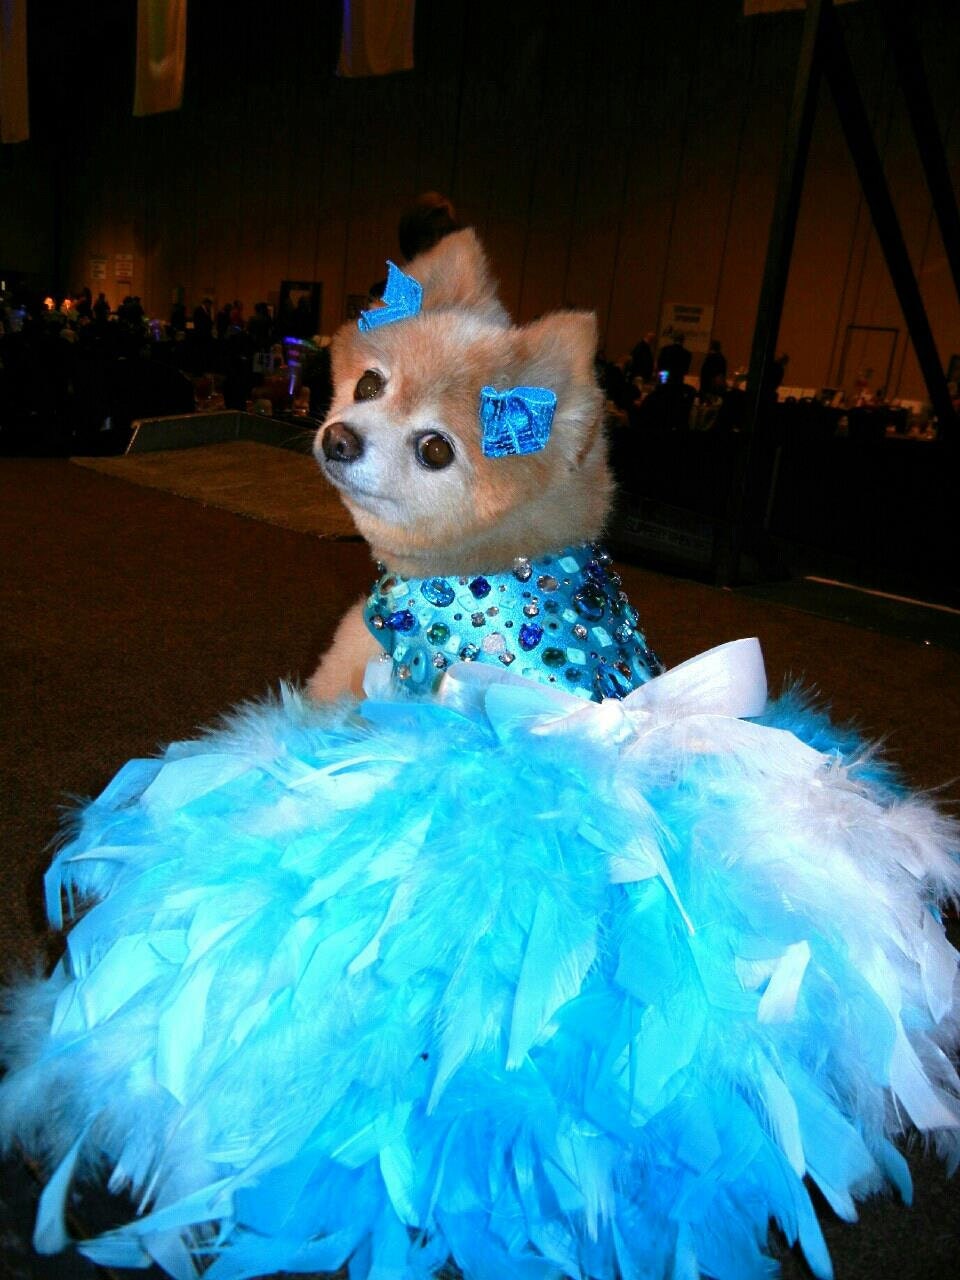  Dog  Dress  Wedding  Turquoise Bling Satin Feather by KOCouture